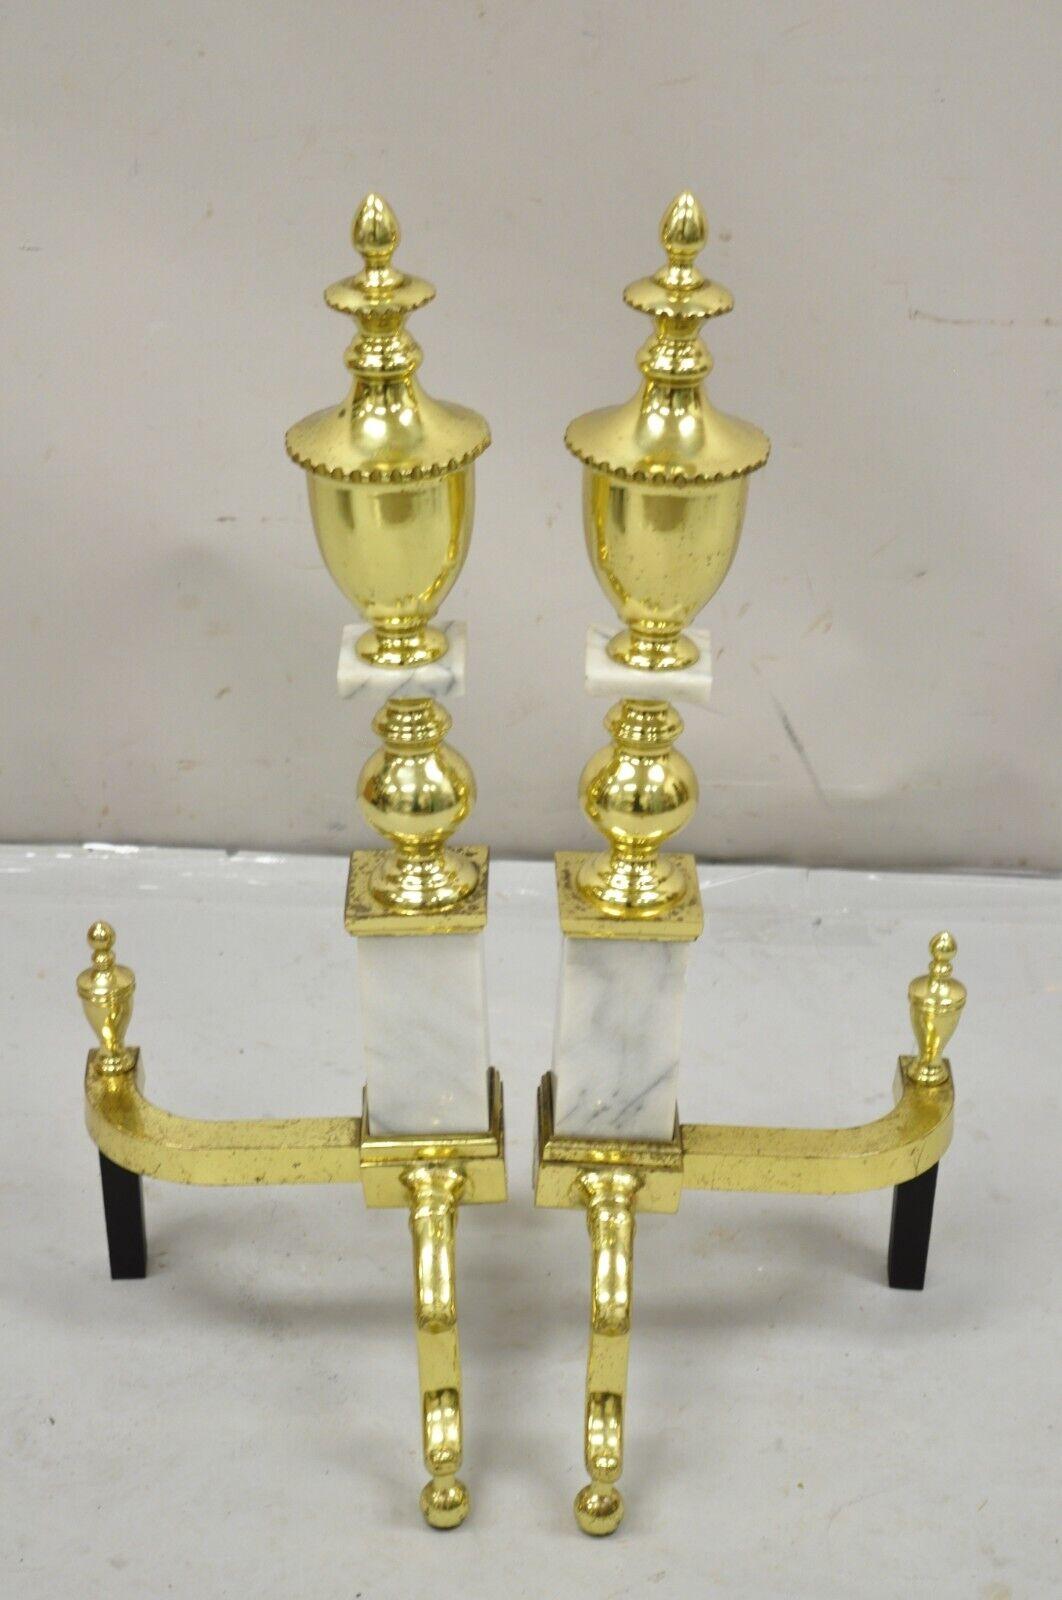 Vintage Brass Urn & Marble Federal Style Branch Leg Fireplace Andirons - a Pair For Sale 7